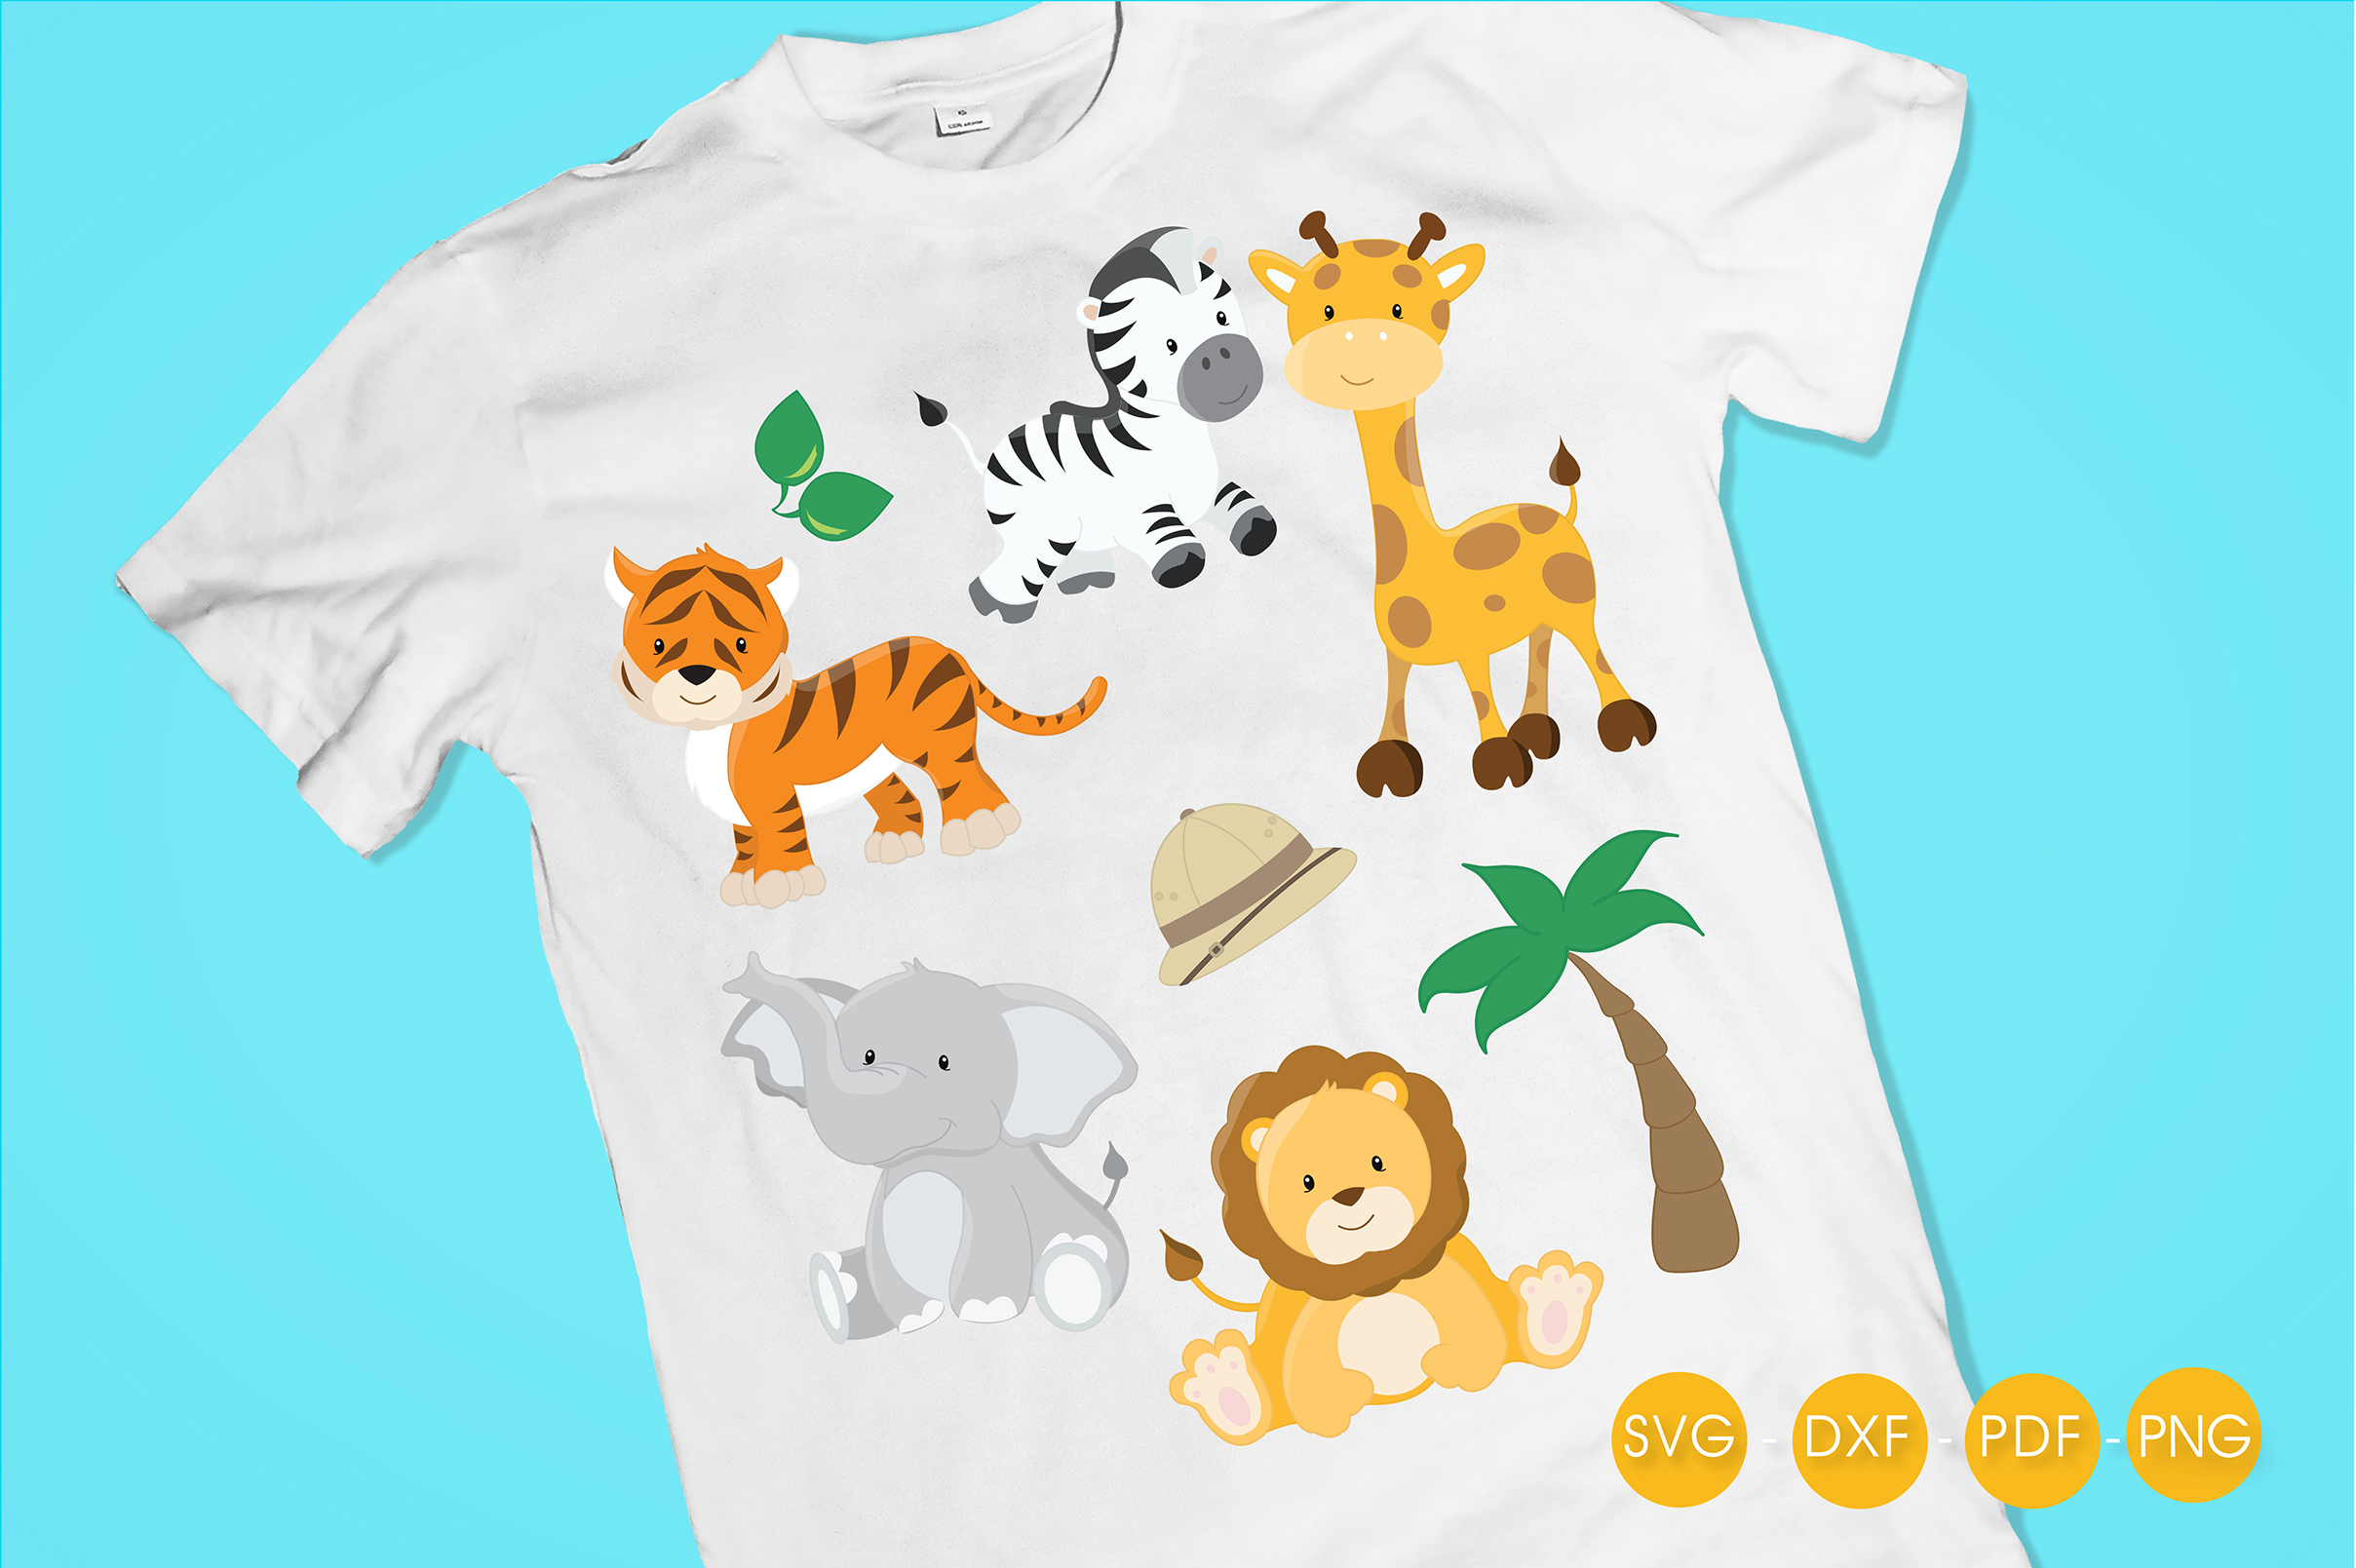 Download Safari Animals cutting files svg, dxf, pdf, eps included ...